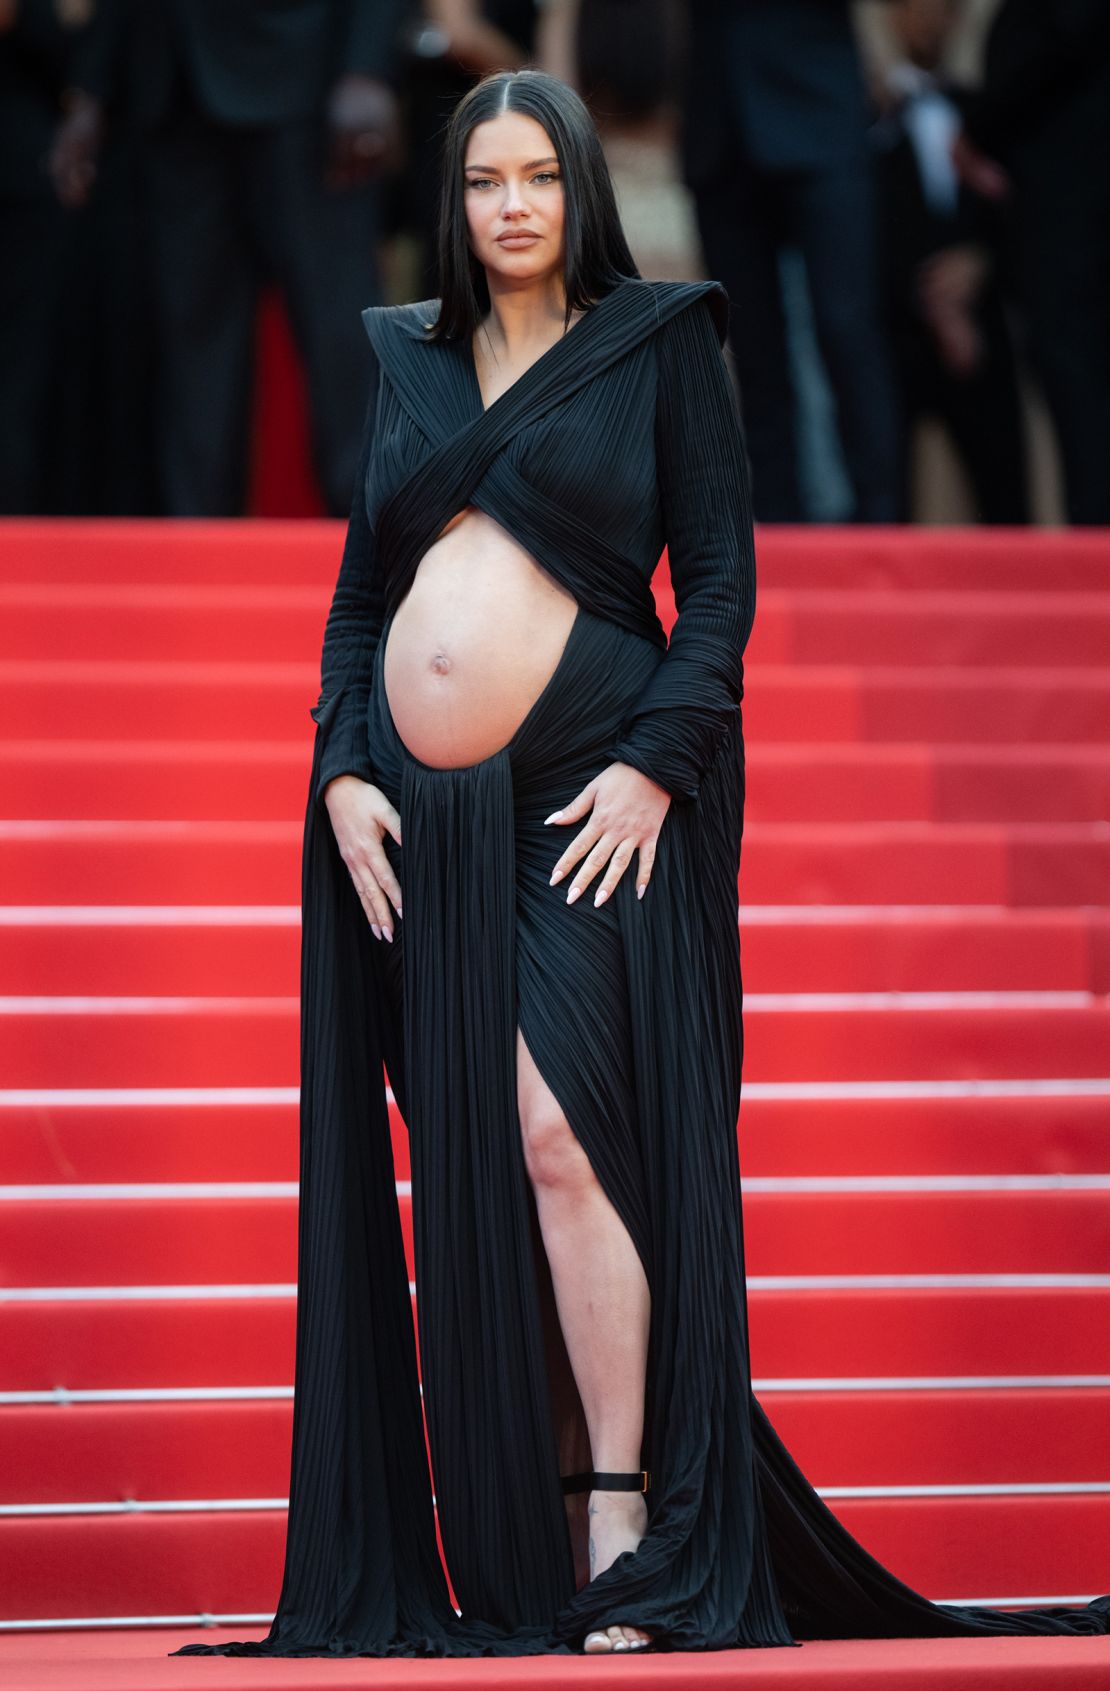 A protruding baby bump was the hottest accessory in Adriana Lima's  Cannes Film Festival red carpet look.